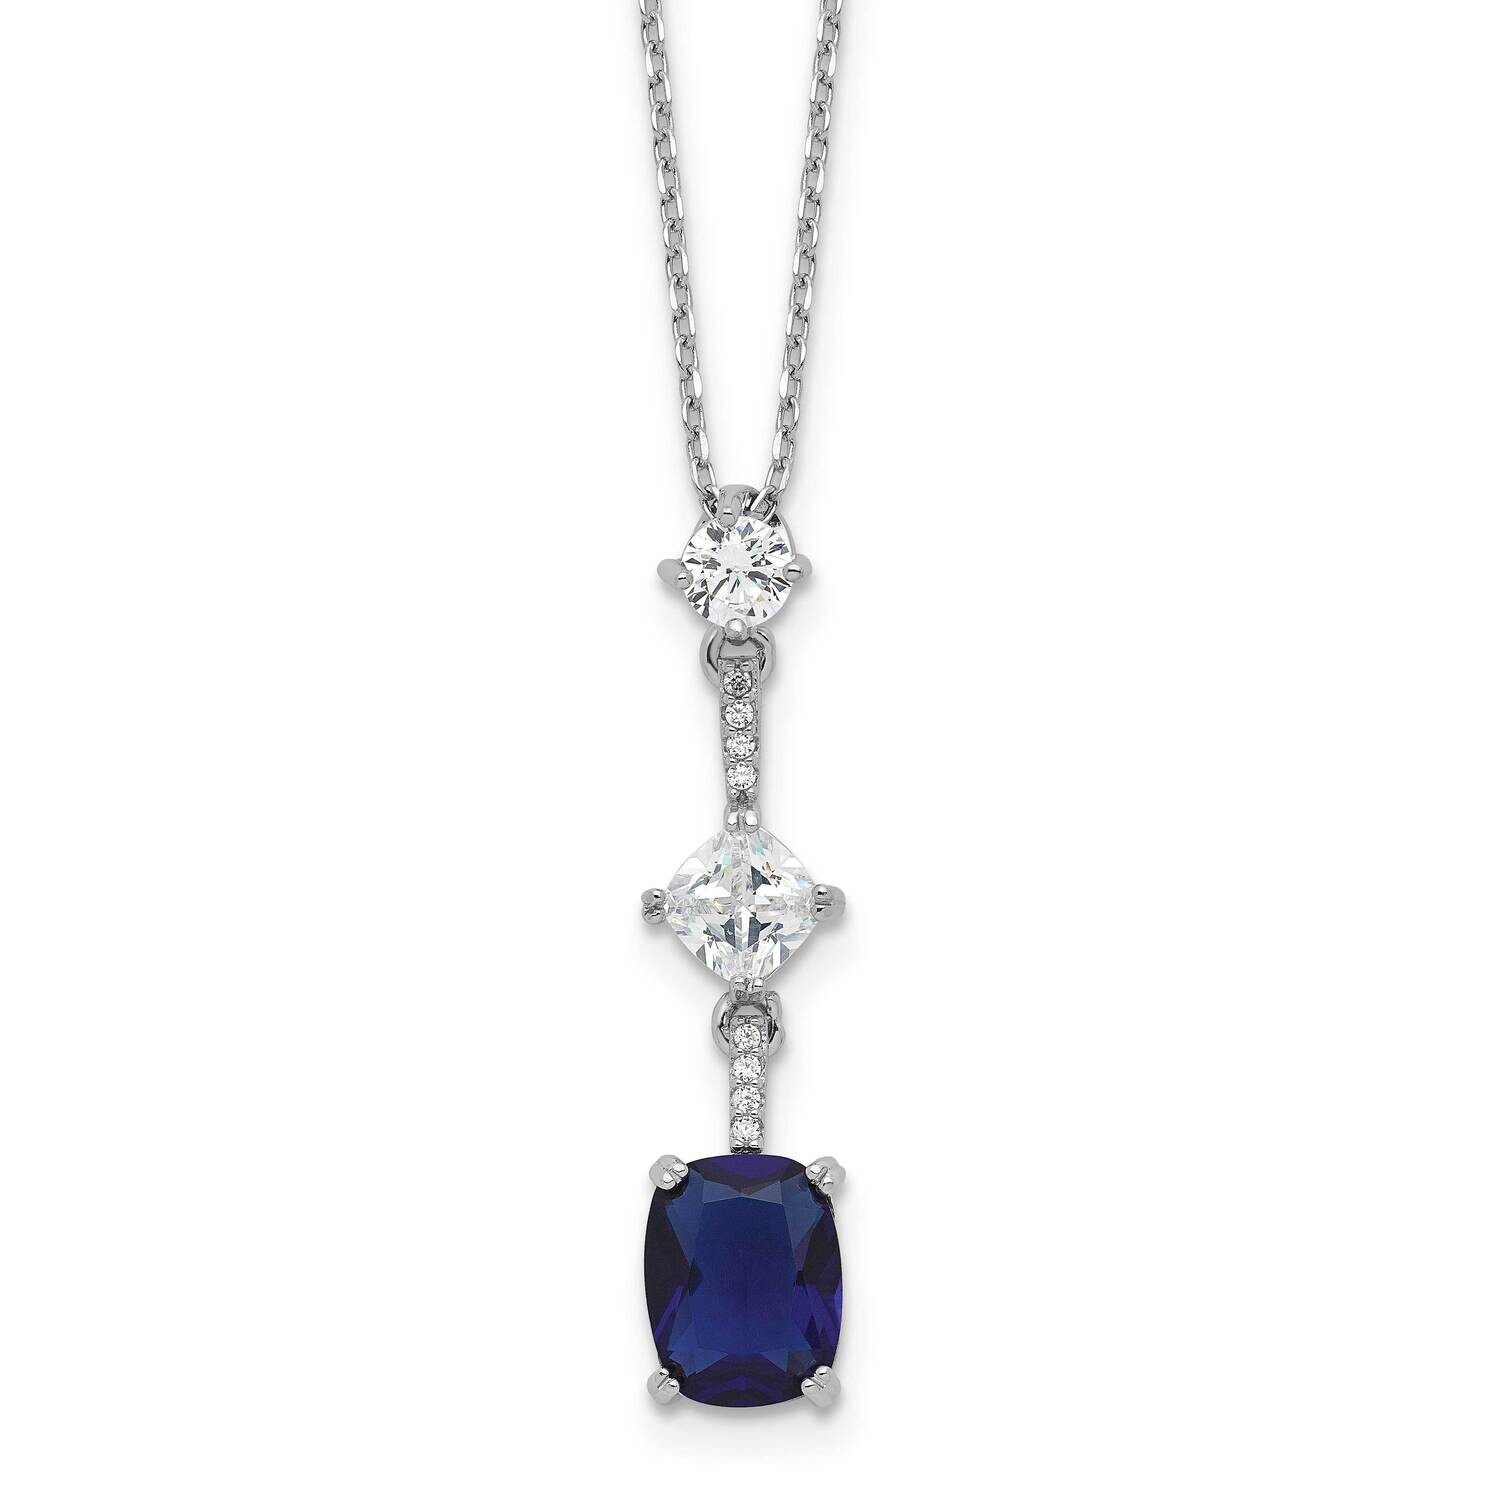 Blue White CZ 16 Inch 2 Inch Extension Necklace Sterling Silver Rhodium-Plated QG6657-16